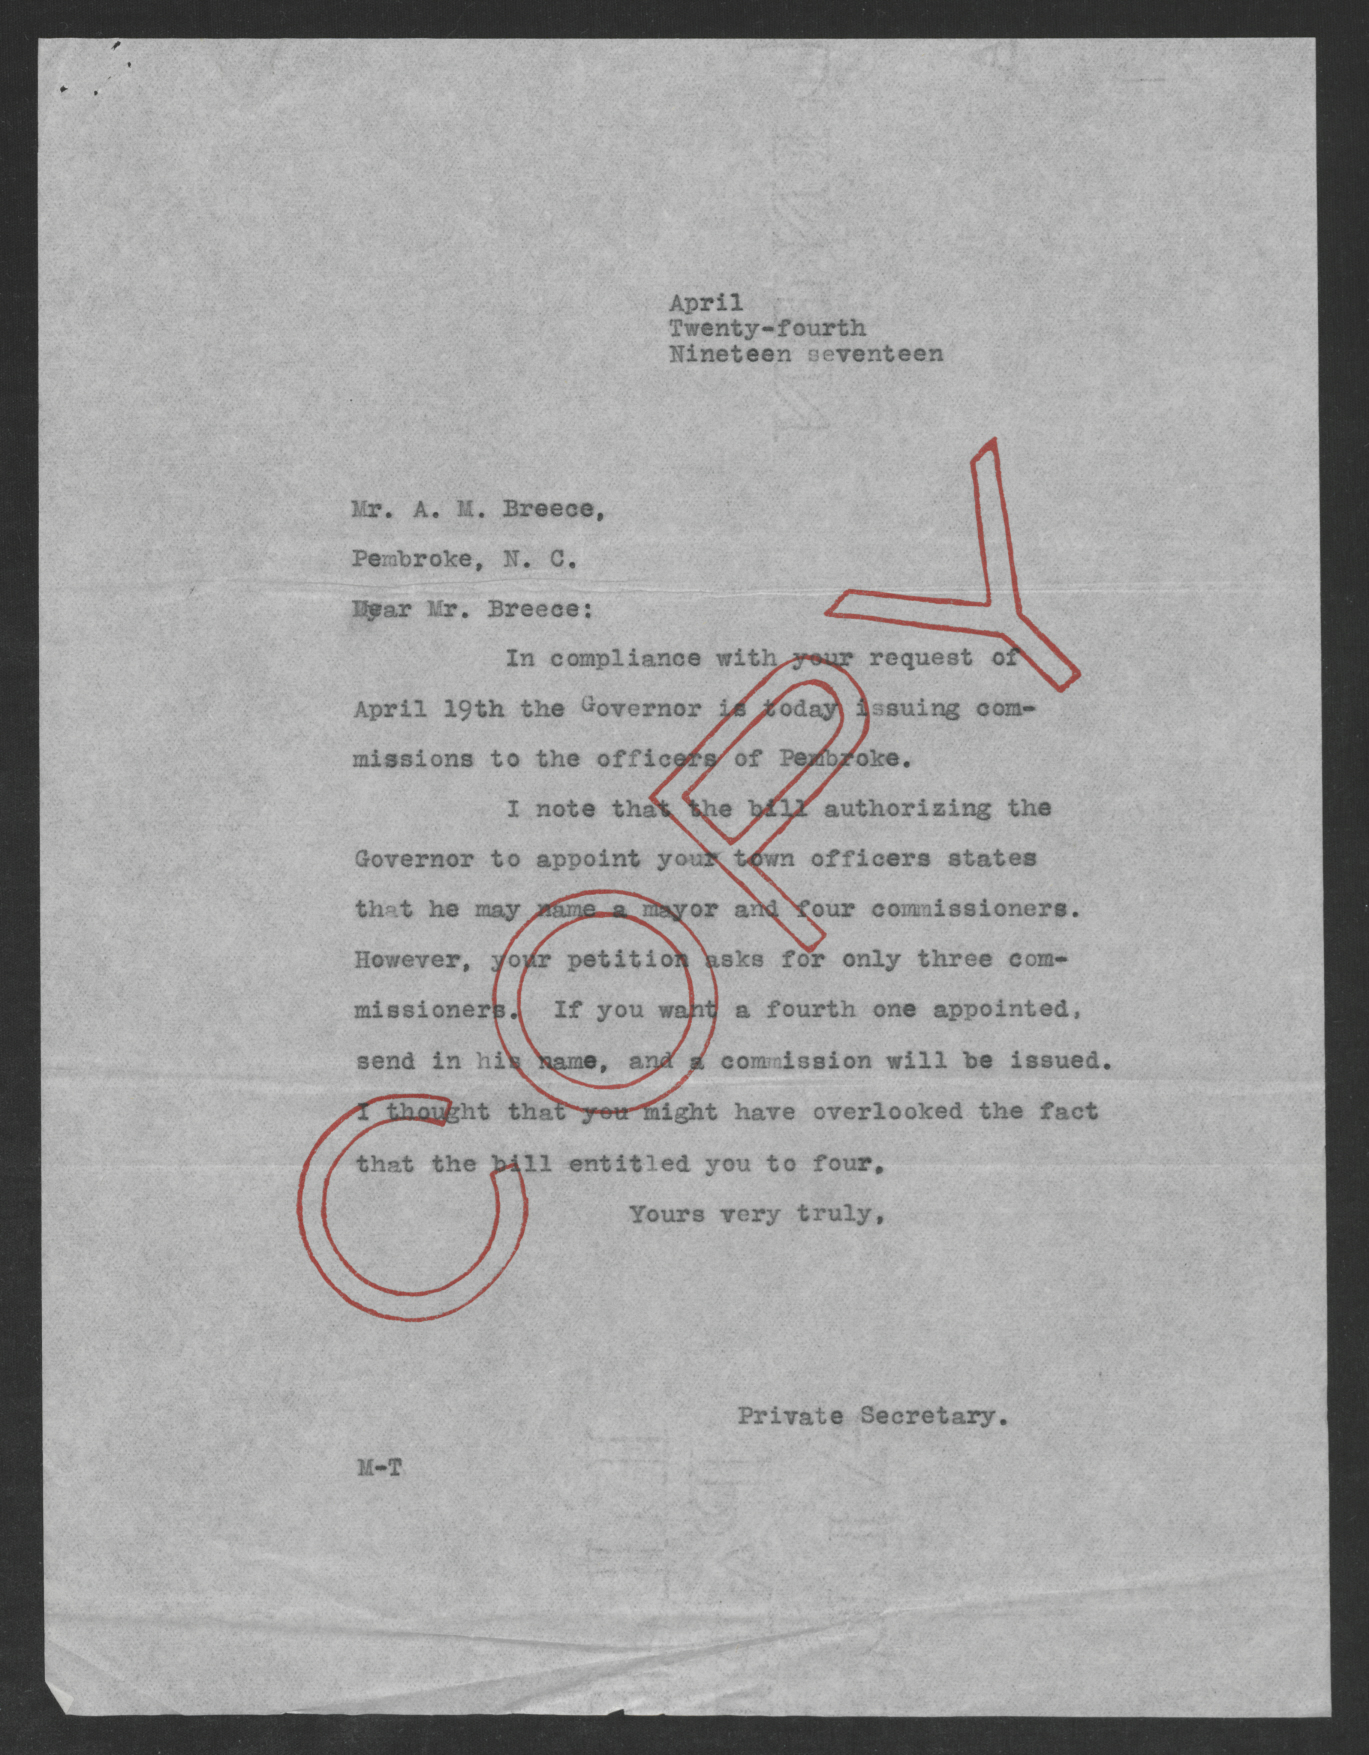 Letter from Santford Martin to A. M. Breece, April 24, 1917